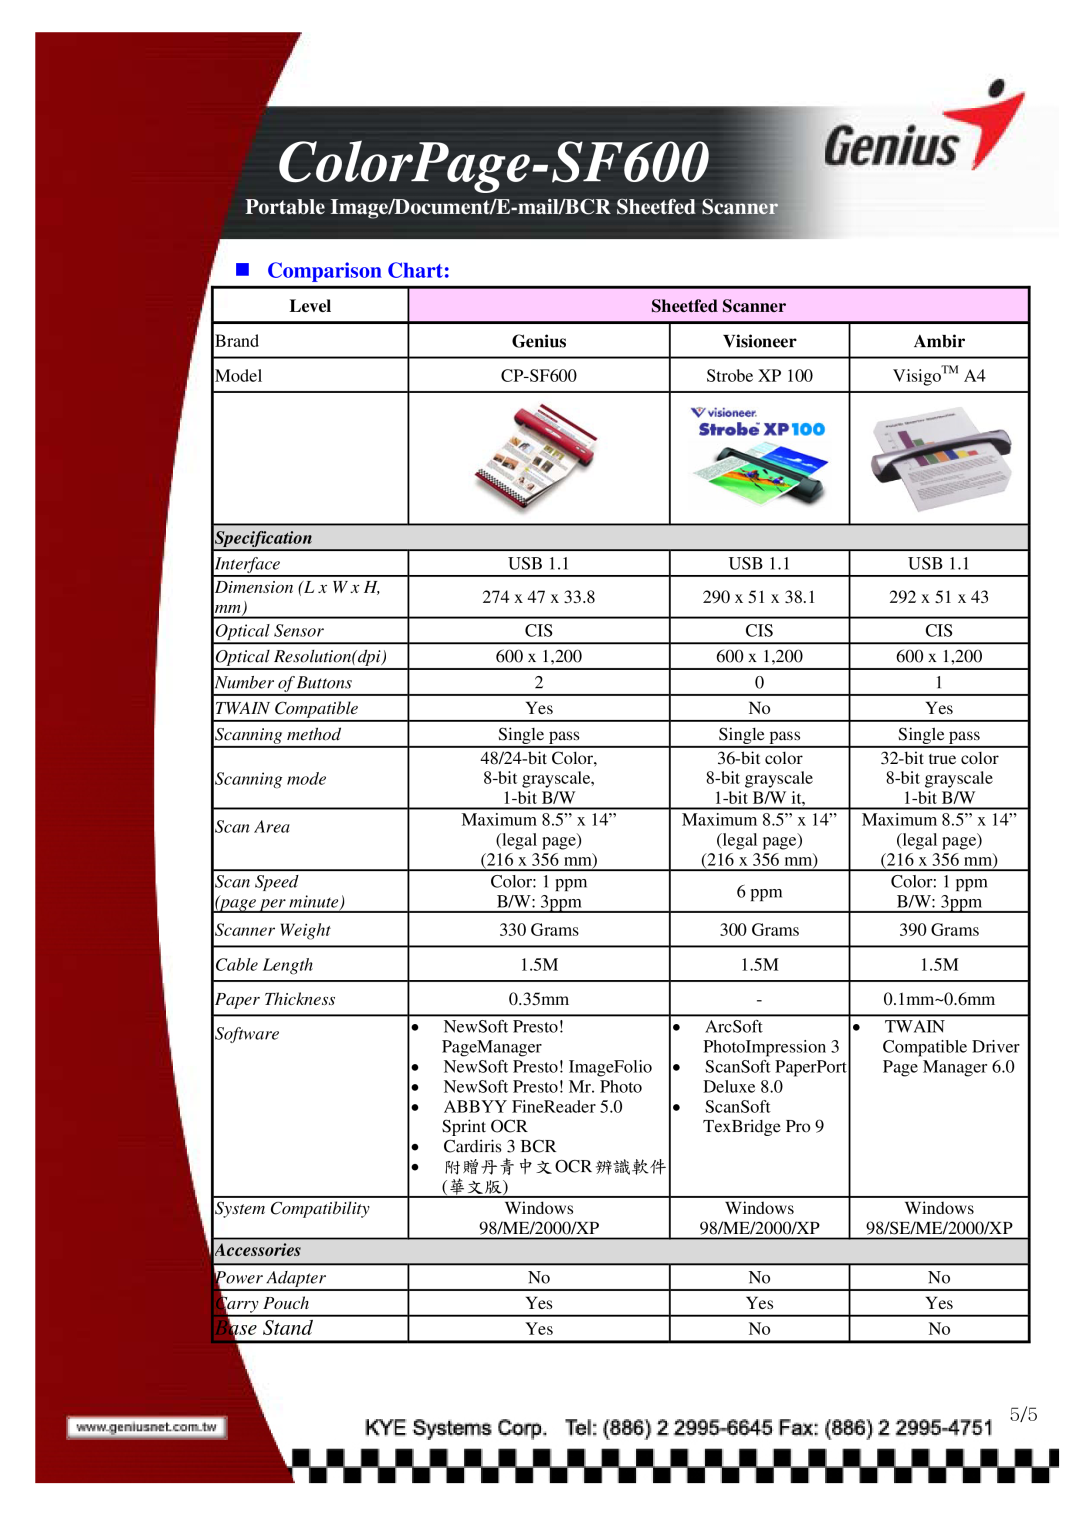 Abbyy USA ColorPage-SF600 Comparison Chart, Portable Image/Document/E-mail/BCR Sheetfed Scanner, Base Stand, Level, Genius 